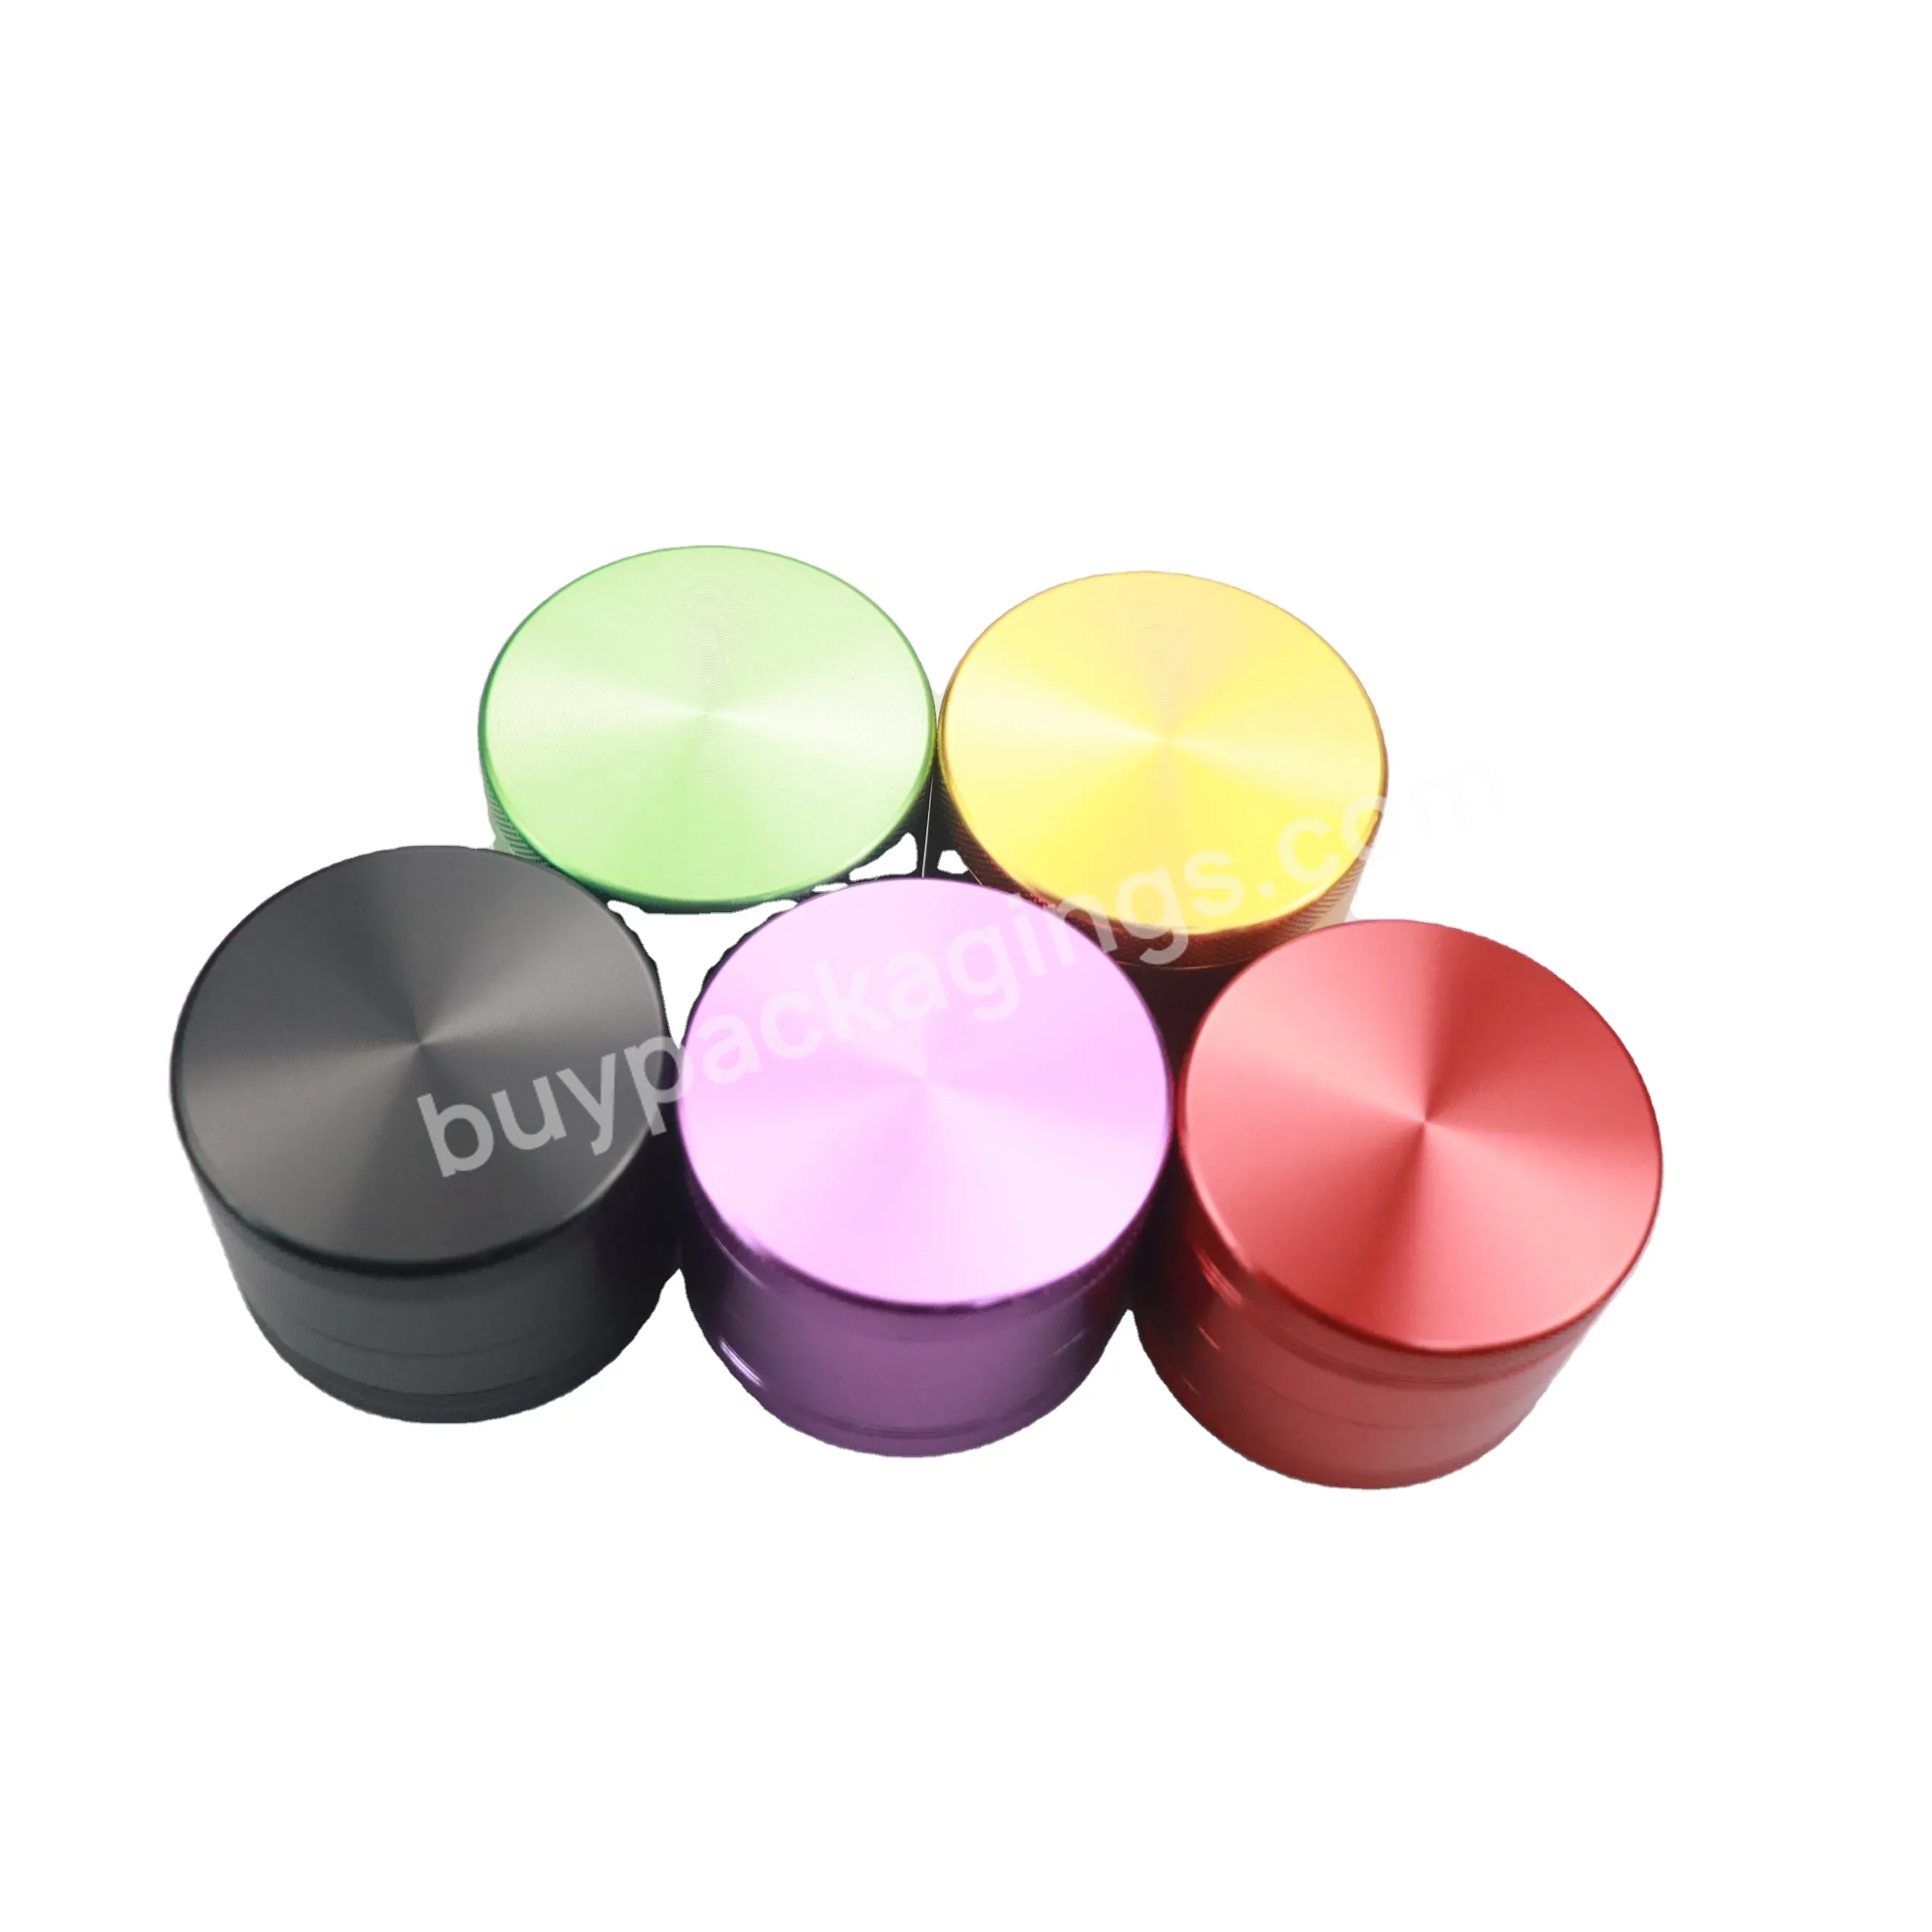 Factory 40mm 4 Layers Metal Grinder Customized Spice Crusher Aluminum Herb Smoking Grinder